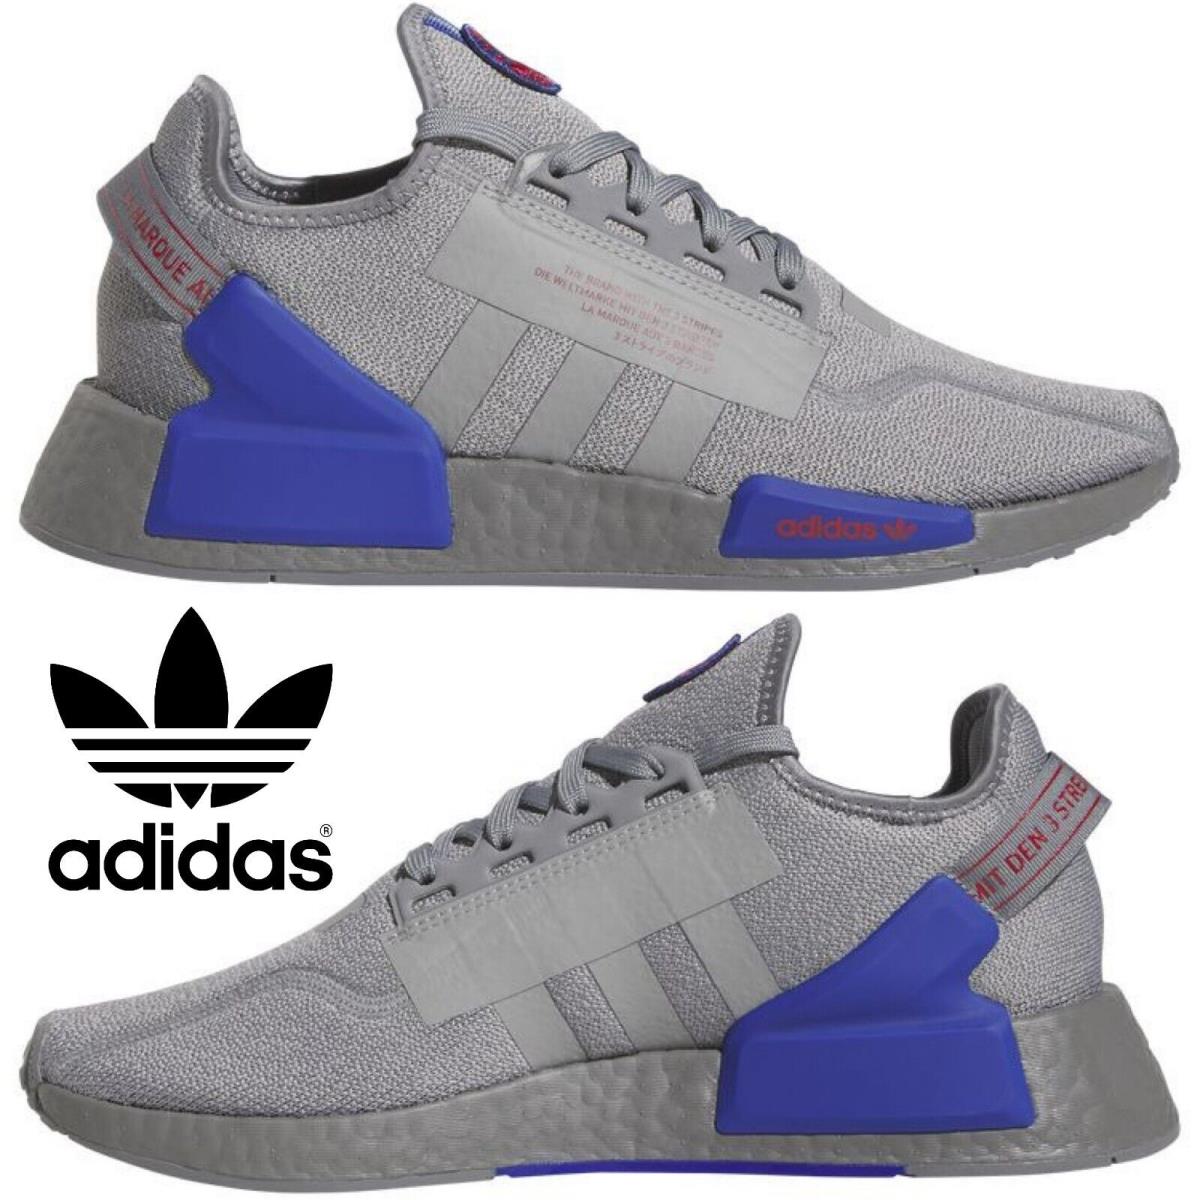 Adidas Originals Nmd R1 V2 Men`s Sneakers Running Shoes Gym Casual Gray - Gray, Manufacturer: Grey/Lucid Blue